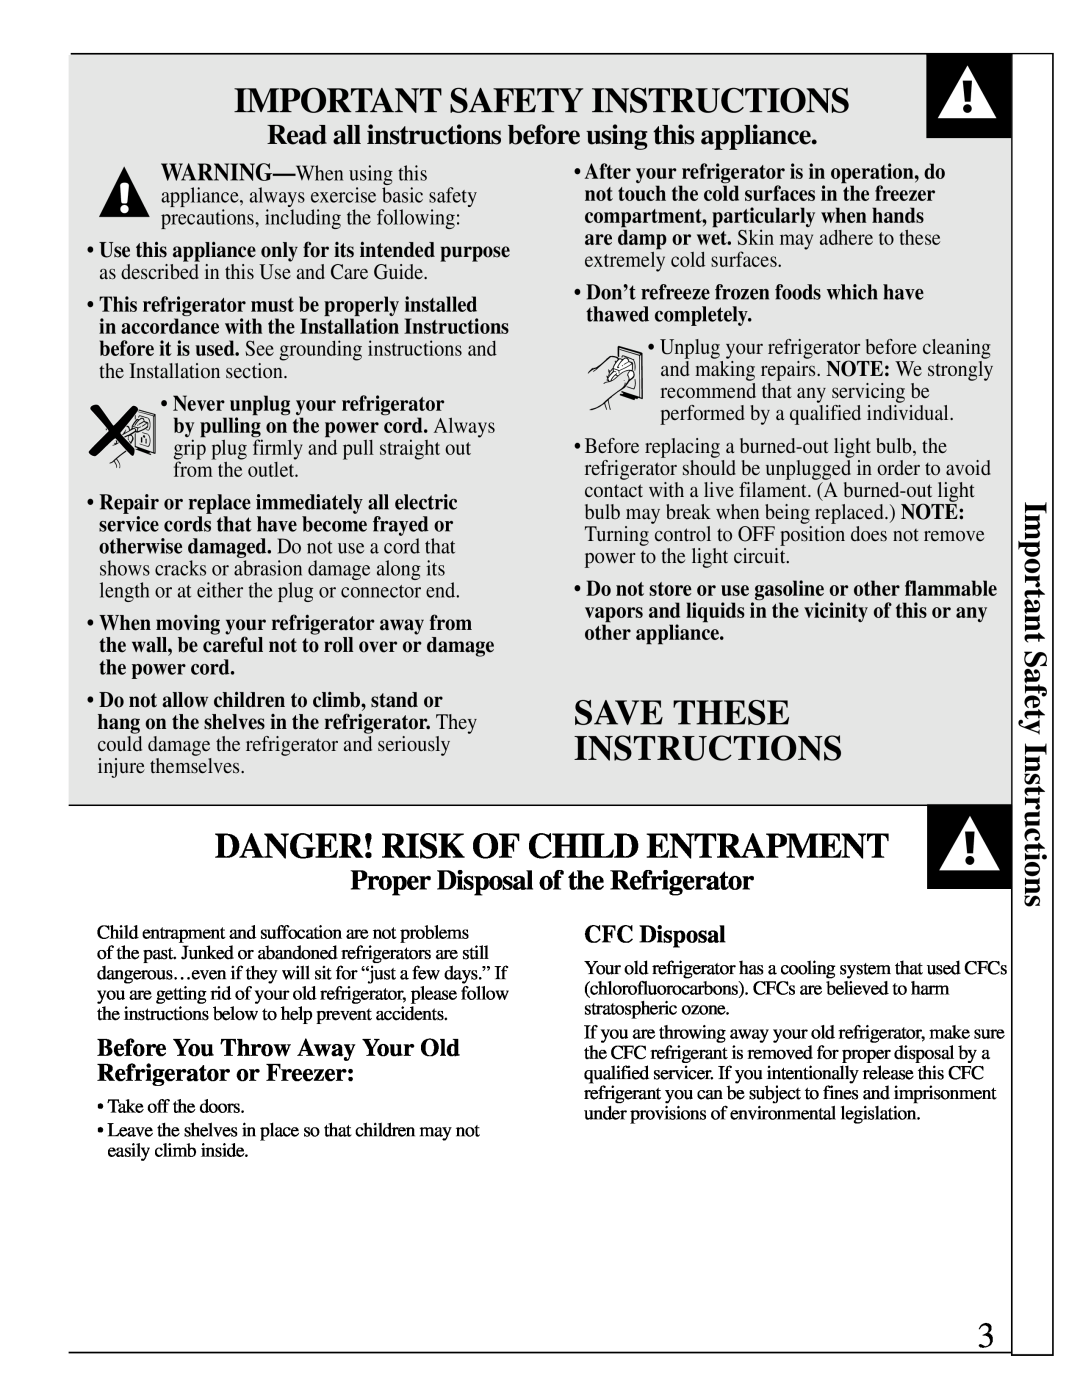 GE 162D3904P005 Important Safety Instructions, Save These Instructions, Danger! Risk Of Child Entrapment, CFC Disposal 